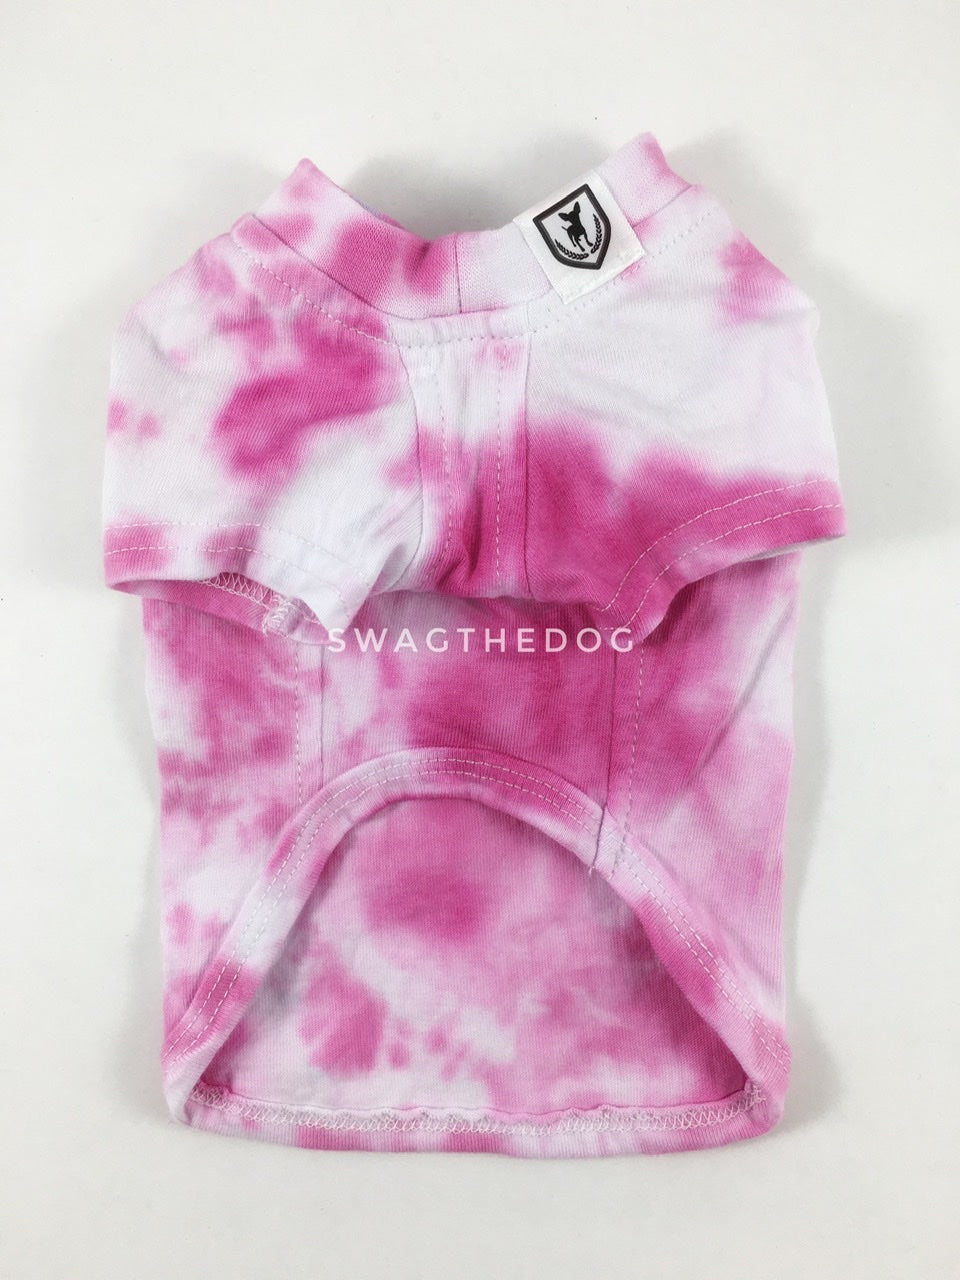 Swagadelic Pink Tie Dye Tee - Product front view. The hand tie-dyed tee with Pink